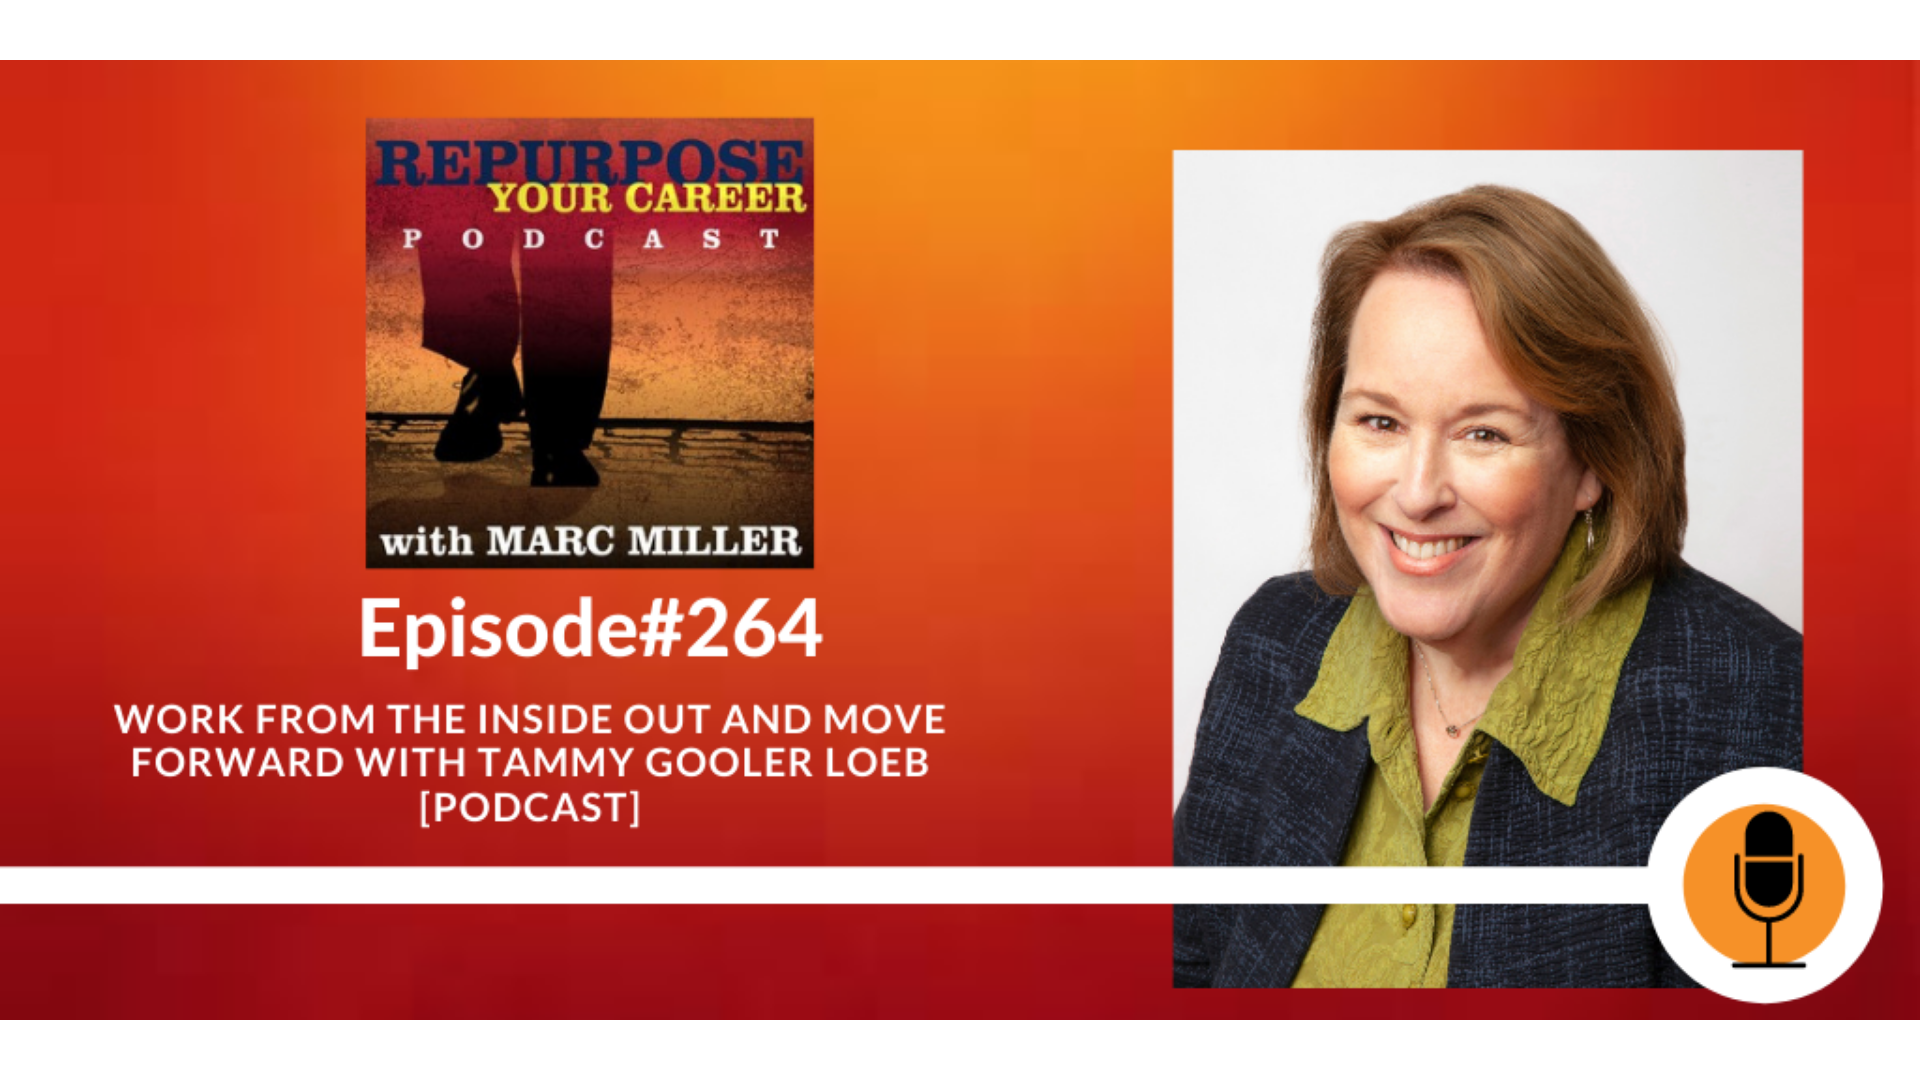 Work from the Inside Out and Transfer Ahead with Tammy Gooler Loeb [Podcast]